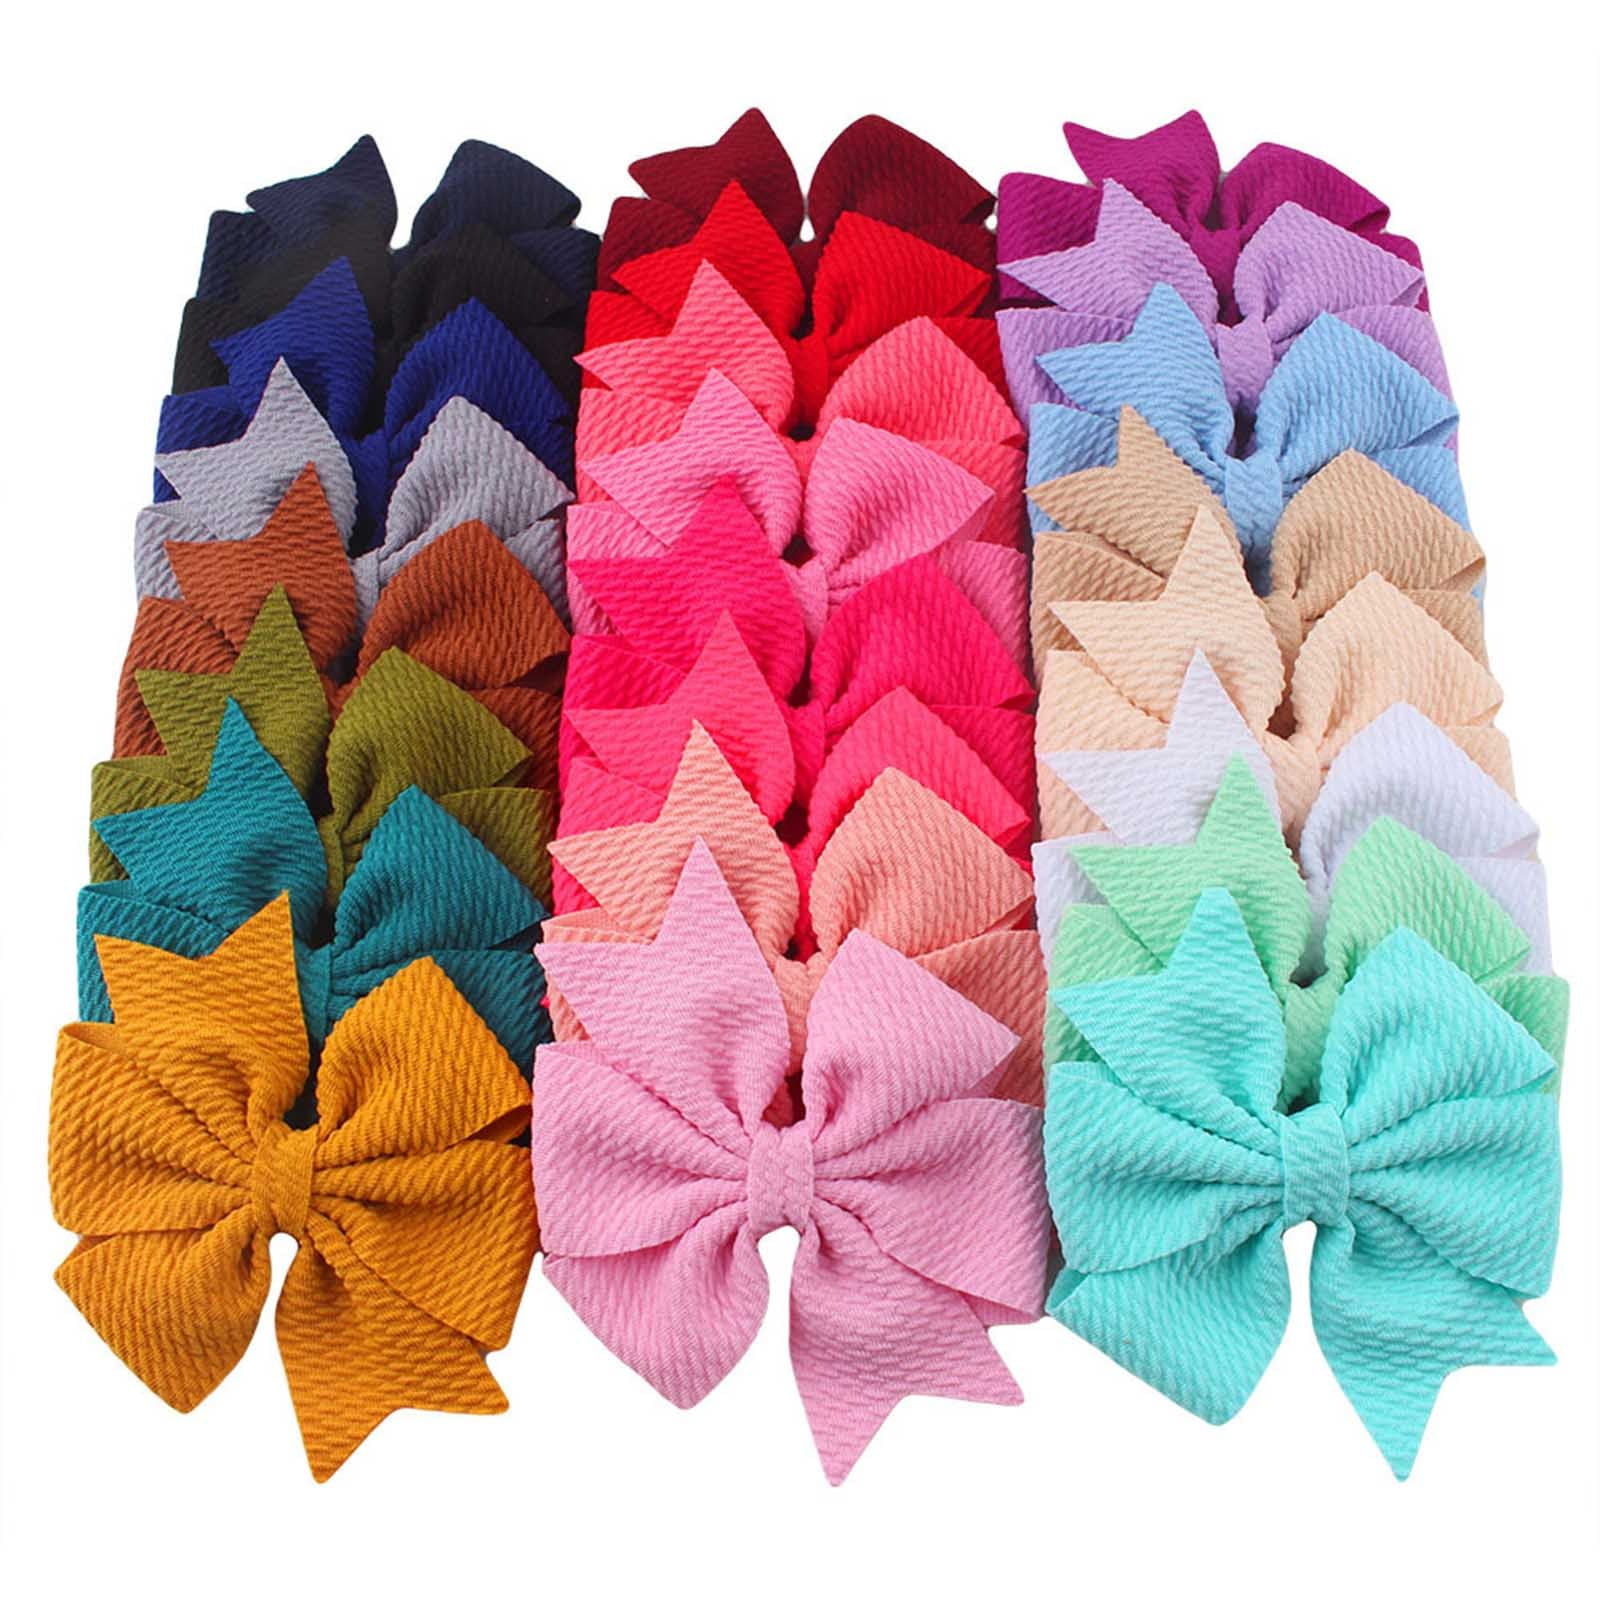 24pcs Colorful 1 Yard Luxury Velvet Ribbon for DIY Hair Accessories Craft